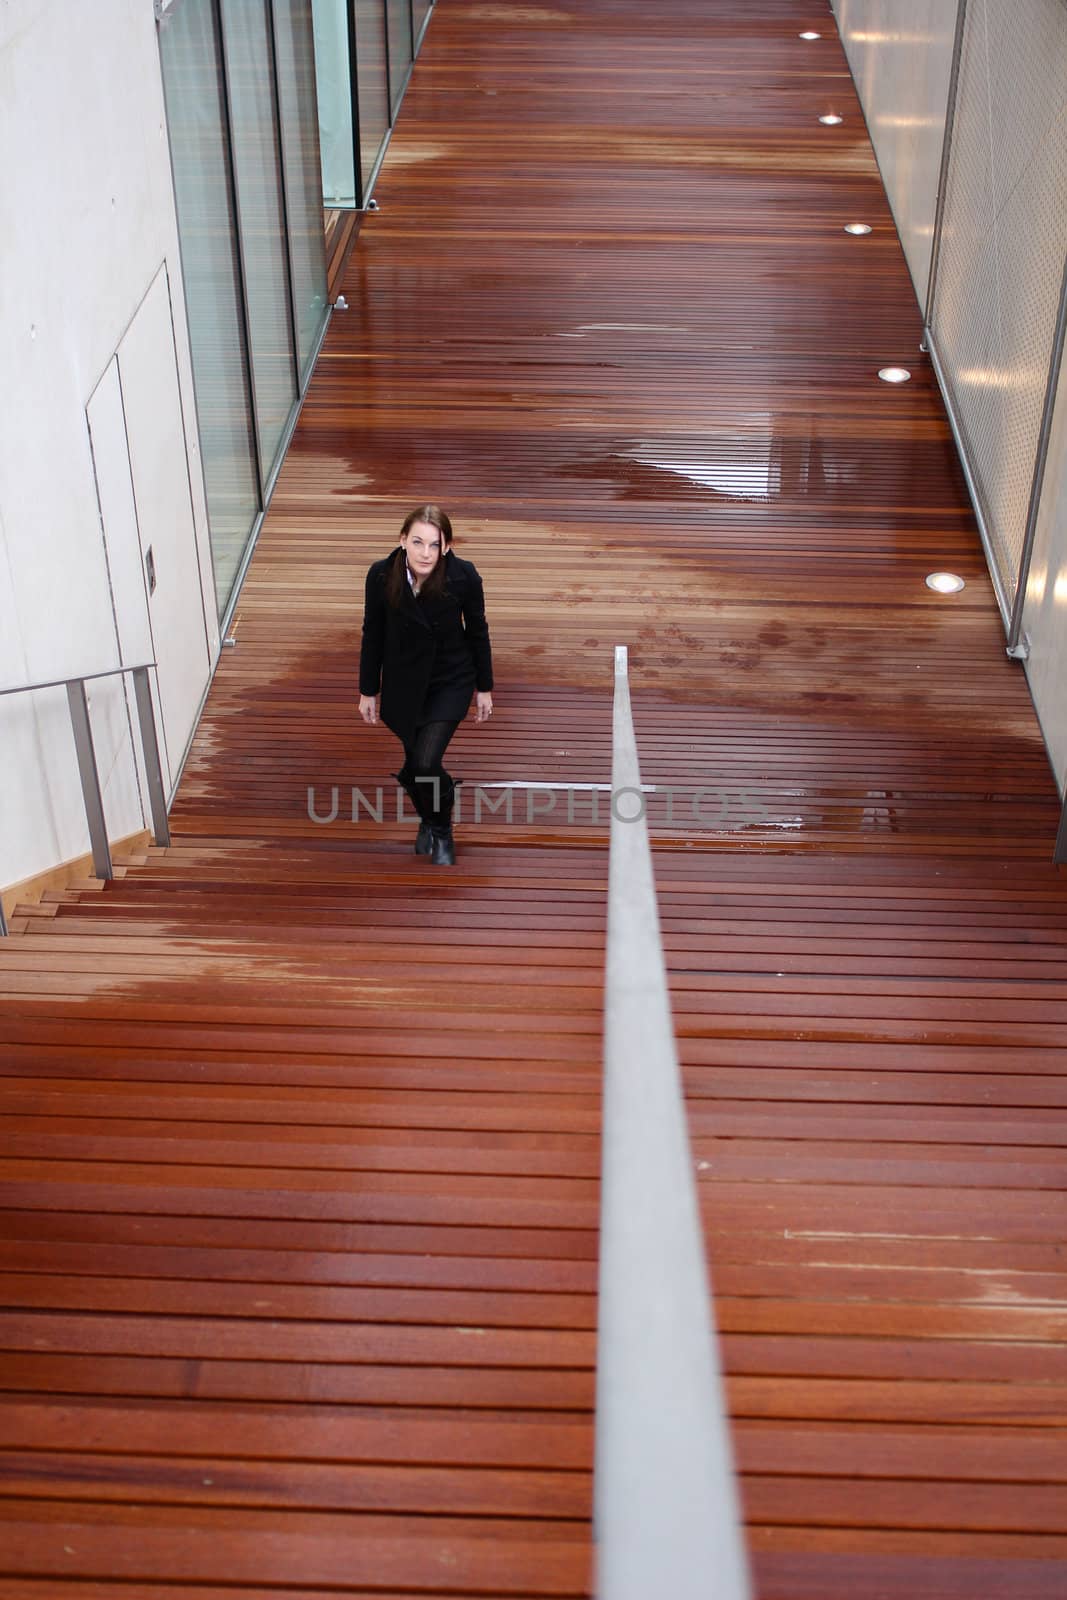 Brunette Woman Walking Up Stairs by dwaschnig_photo